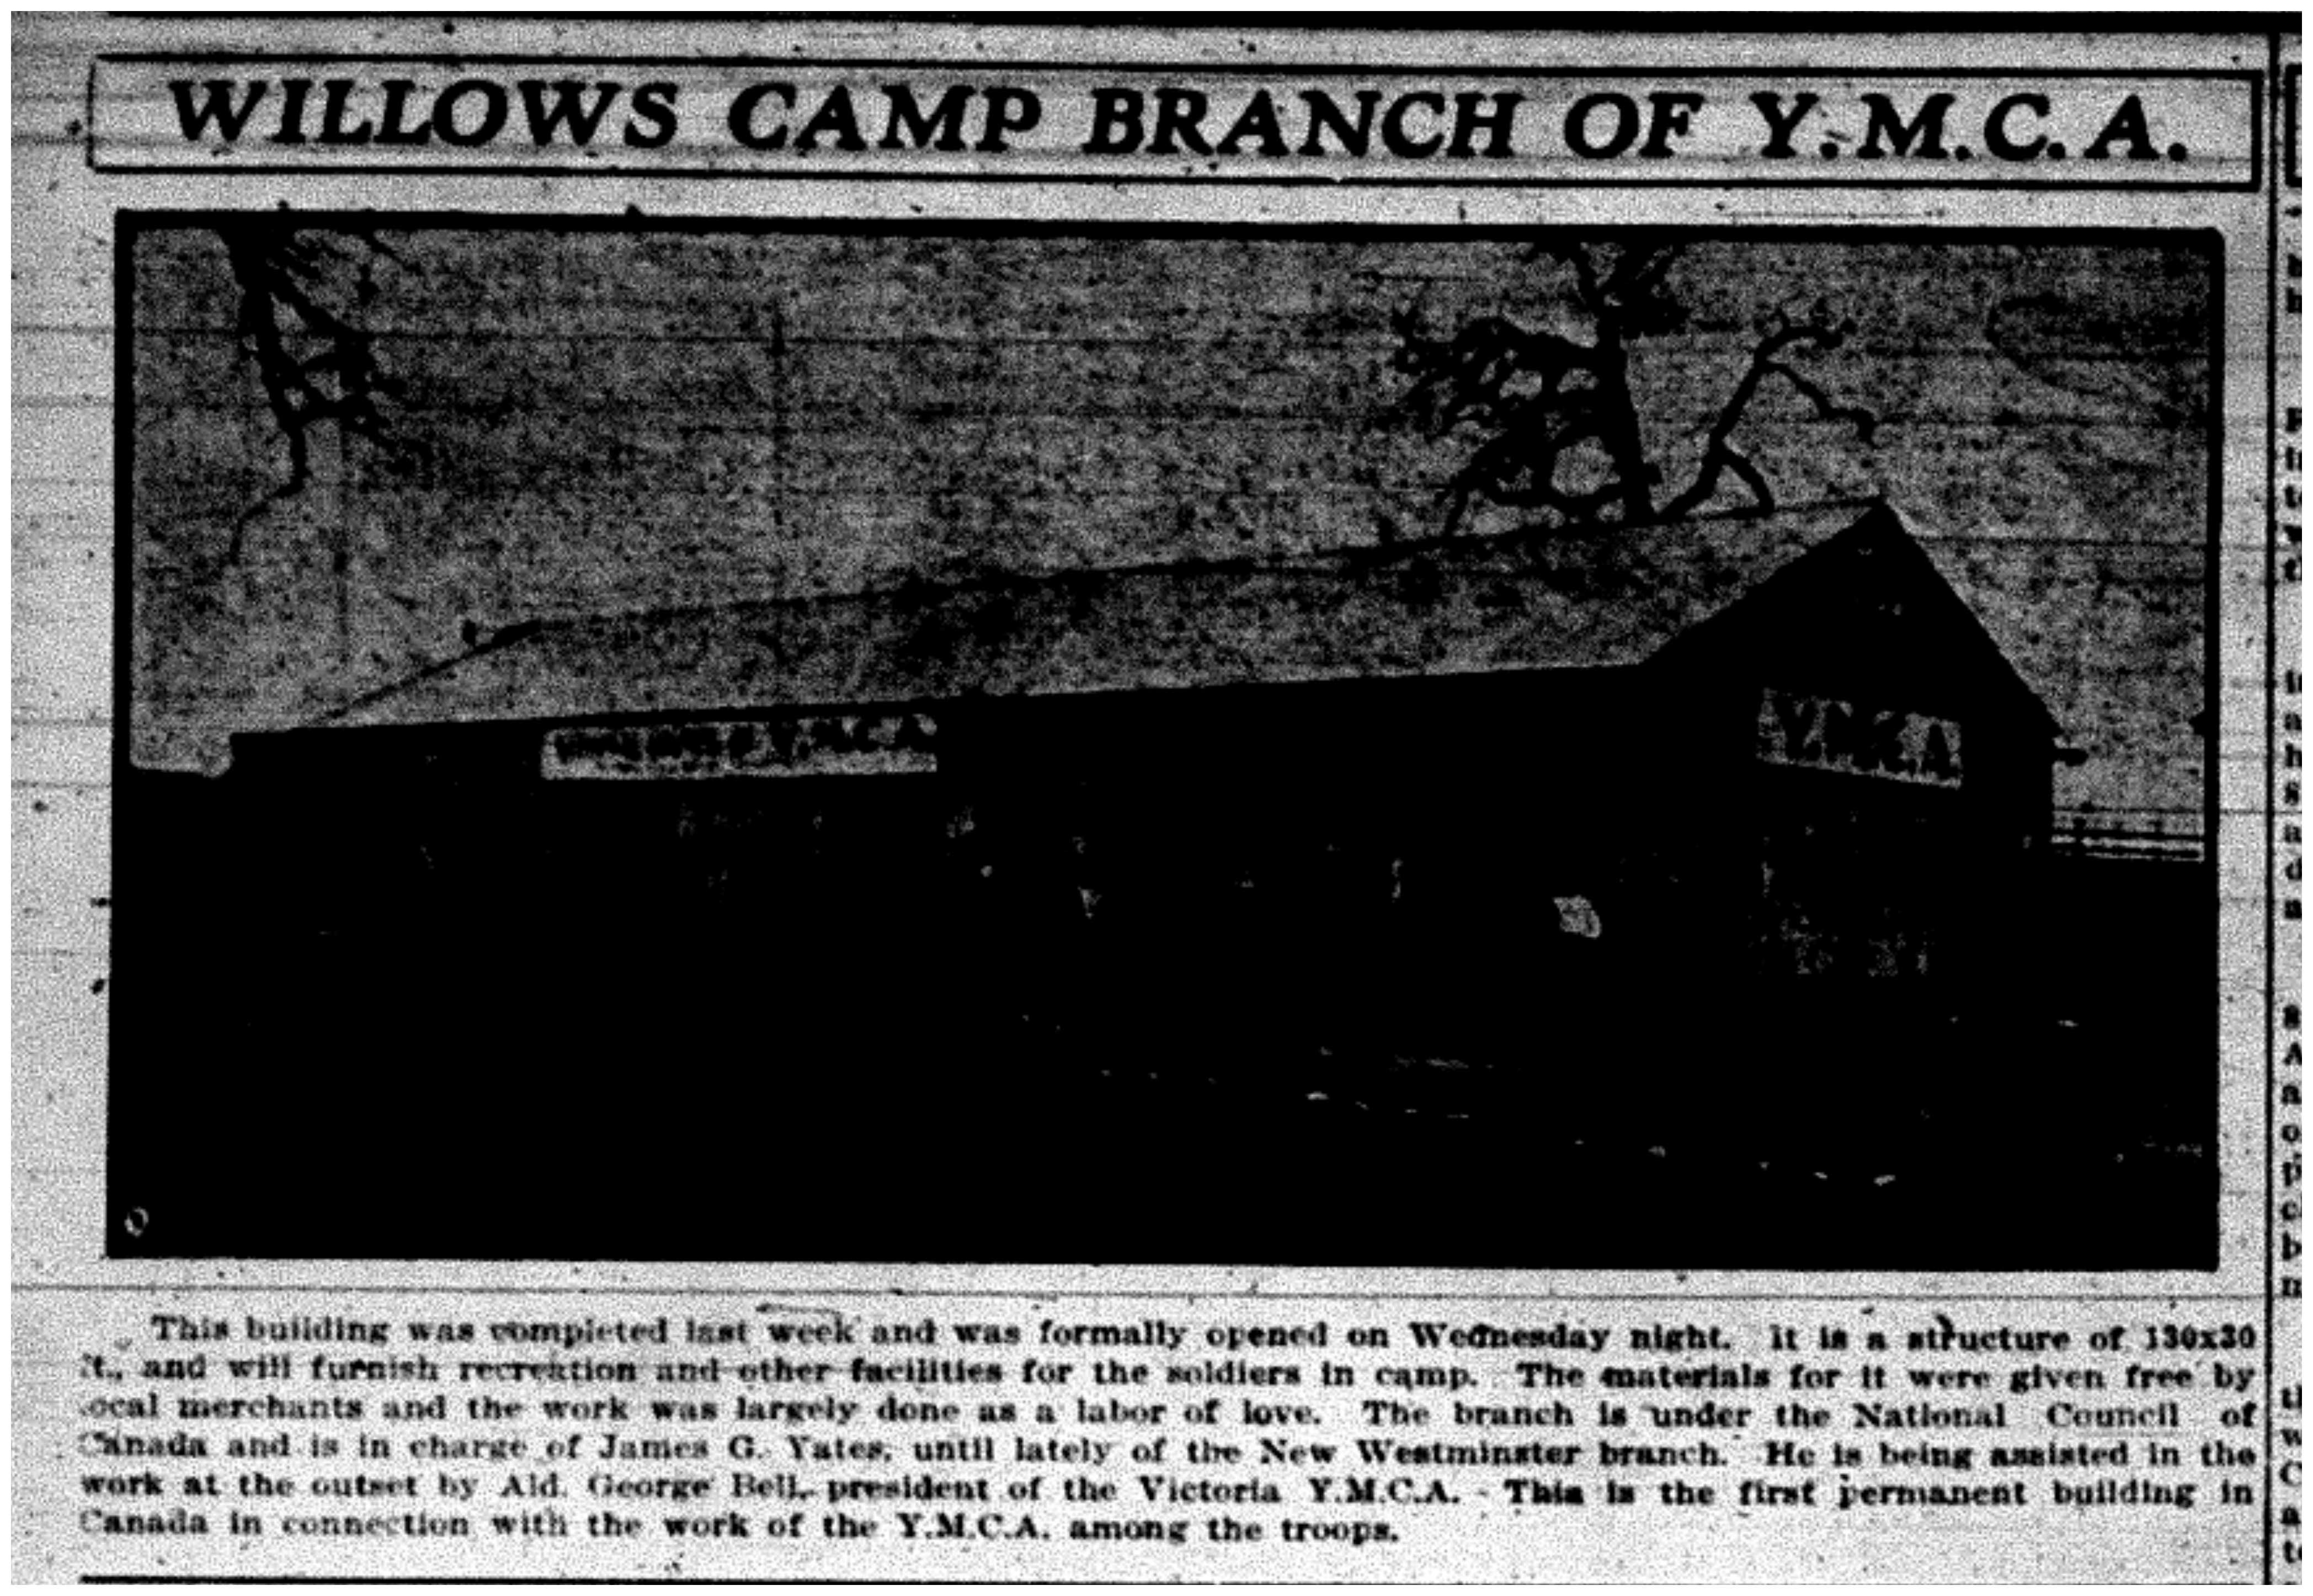 "Willows Camp Branch of Y.M.C.A."